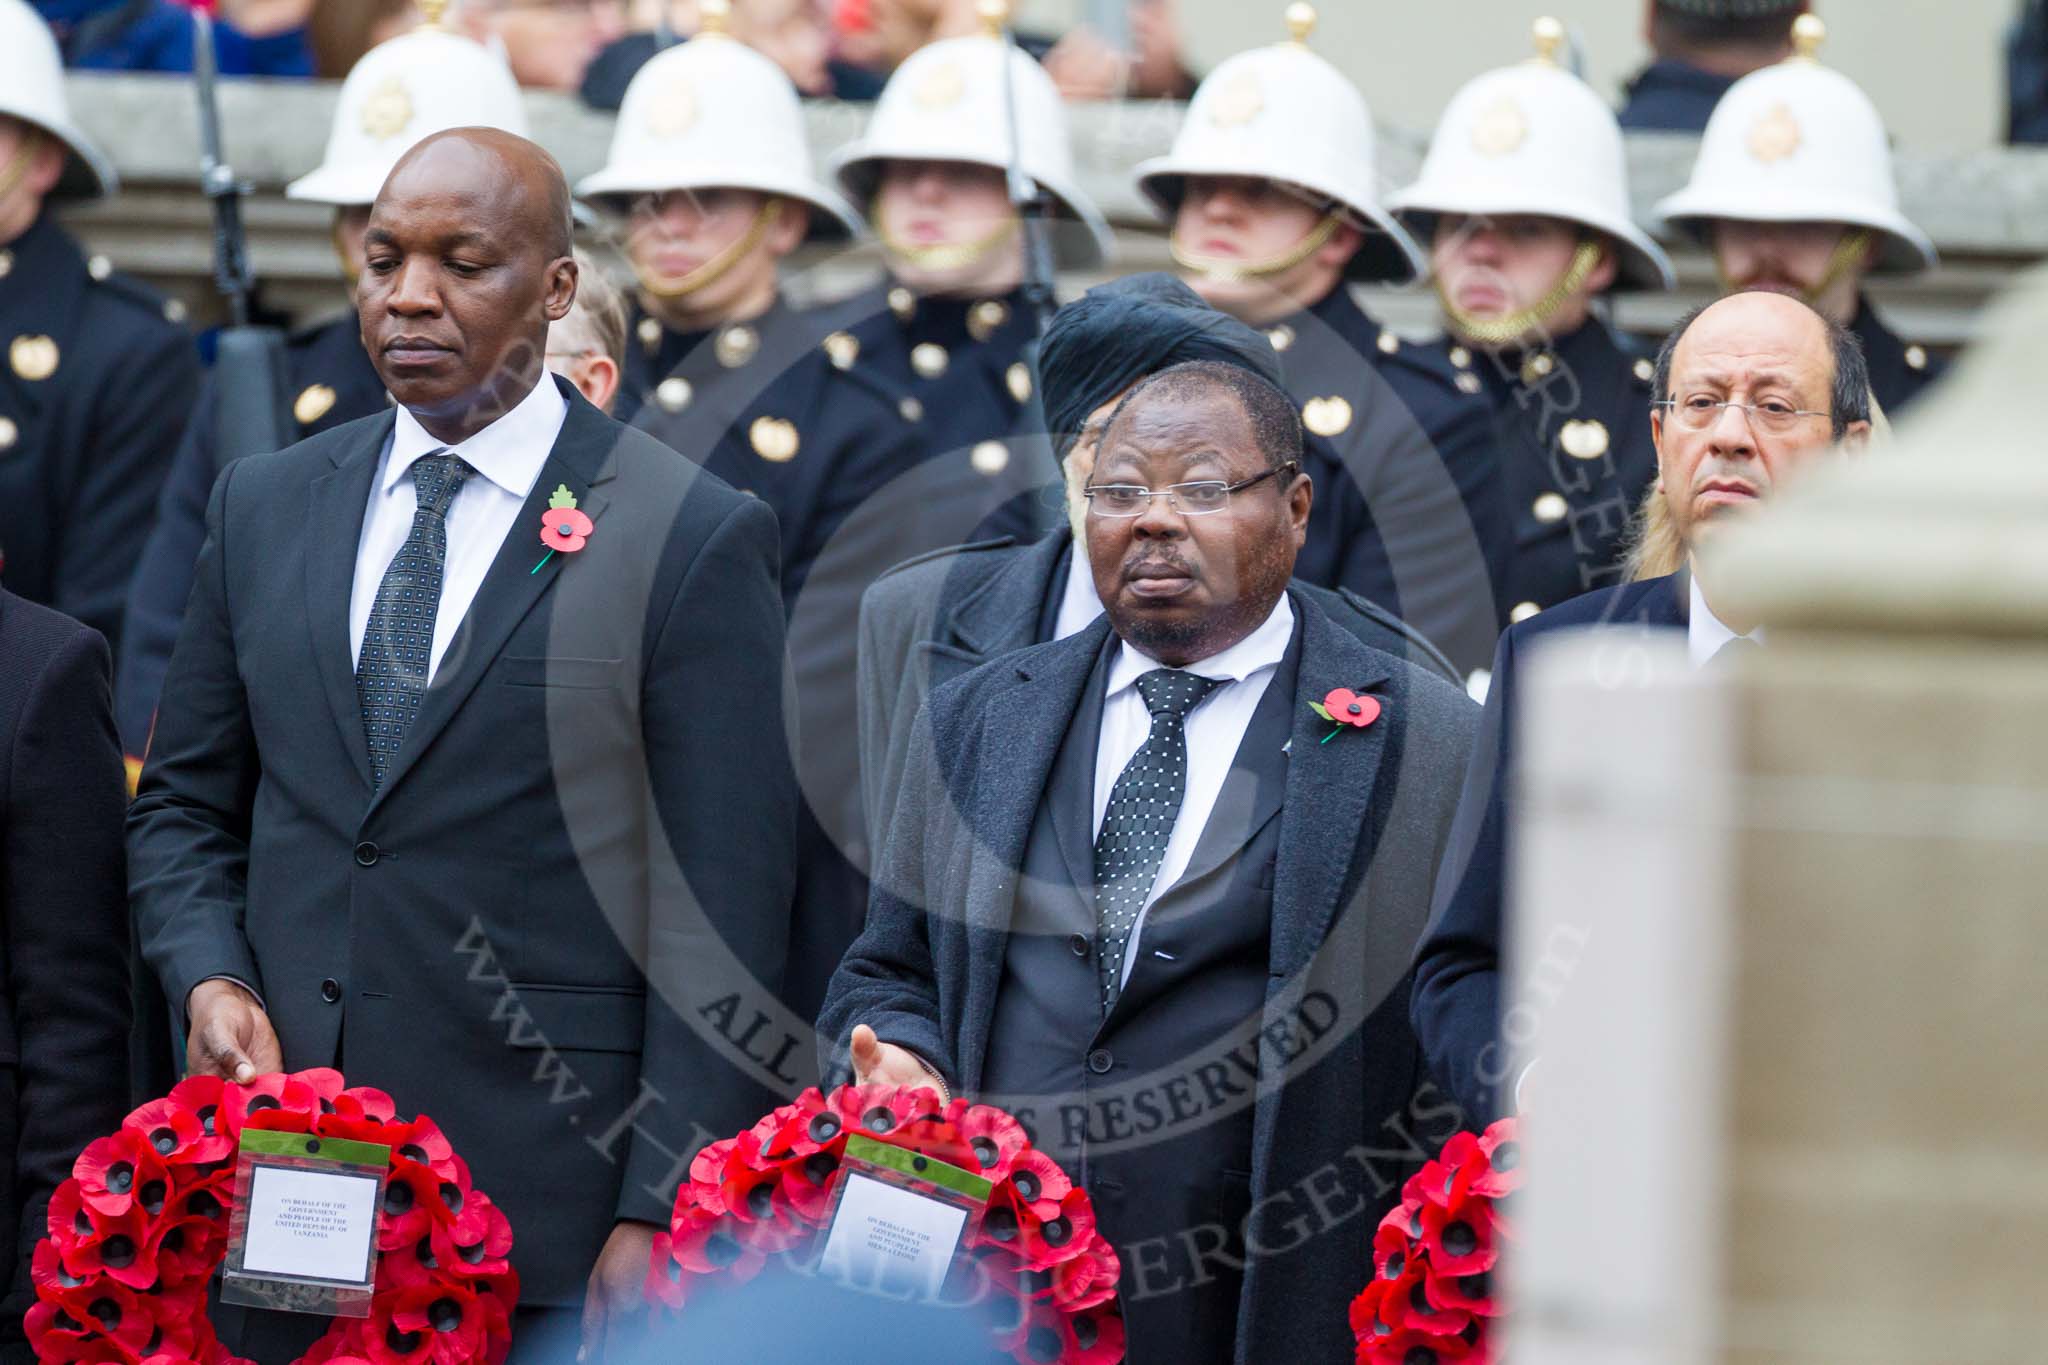 Remembrance Sunday at the Cenotaph 2015: The High Commissioner of Tanzania, the Deputy High Commissioner of Sierra Leone, and the High Commissioner of Cyprus with their wreaths at the Cenotaph. Image #110, 08 November 2015 10:57 Whitehall, London, UK